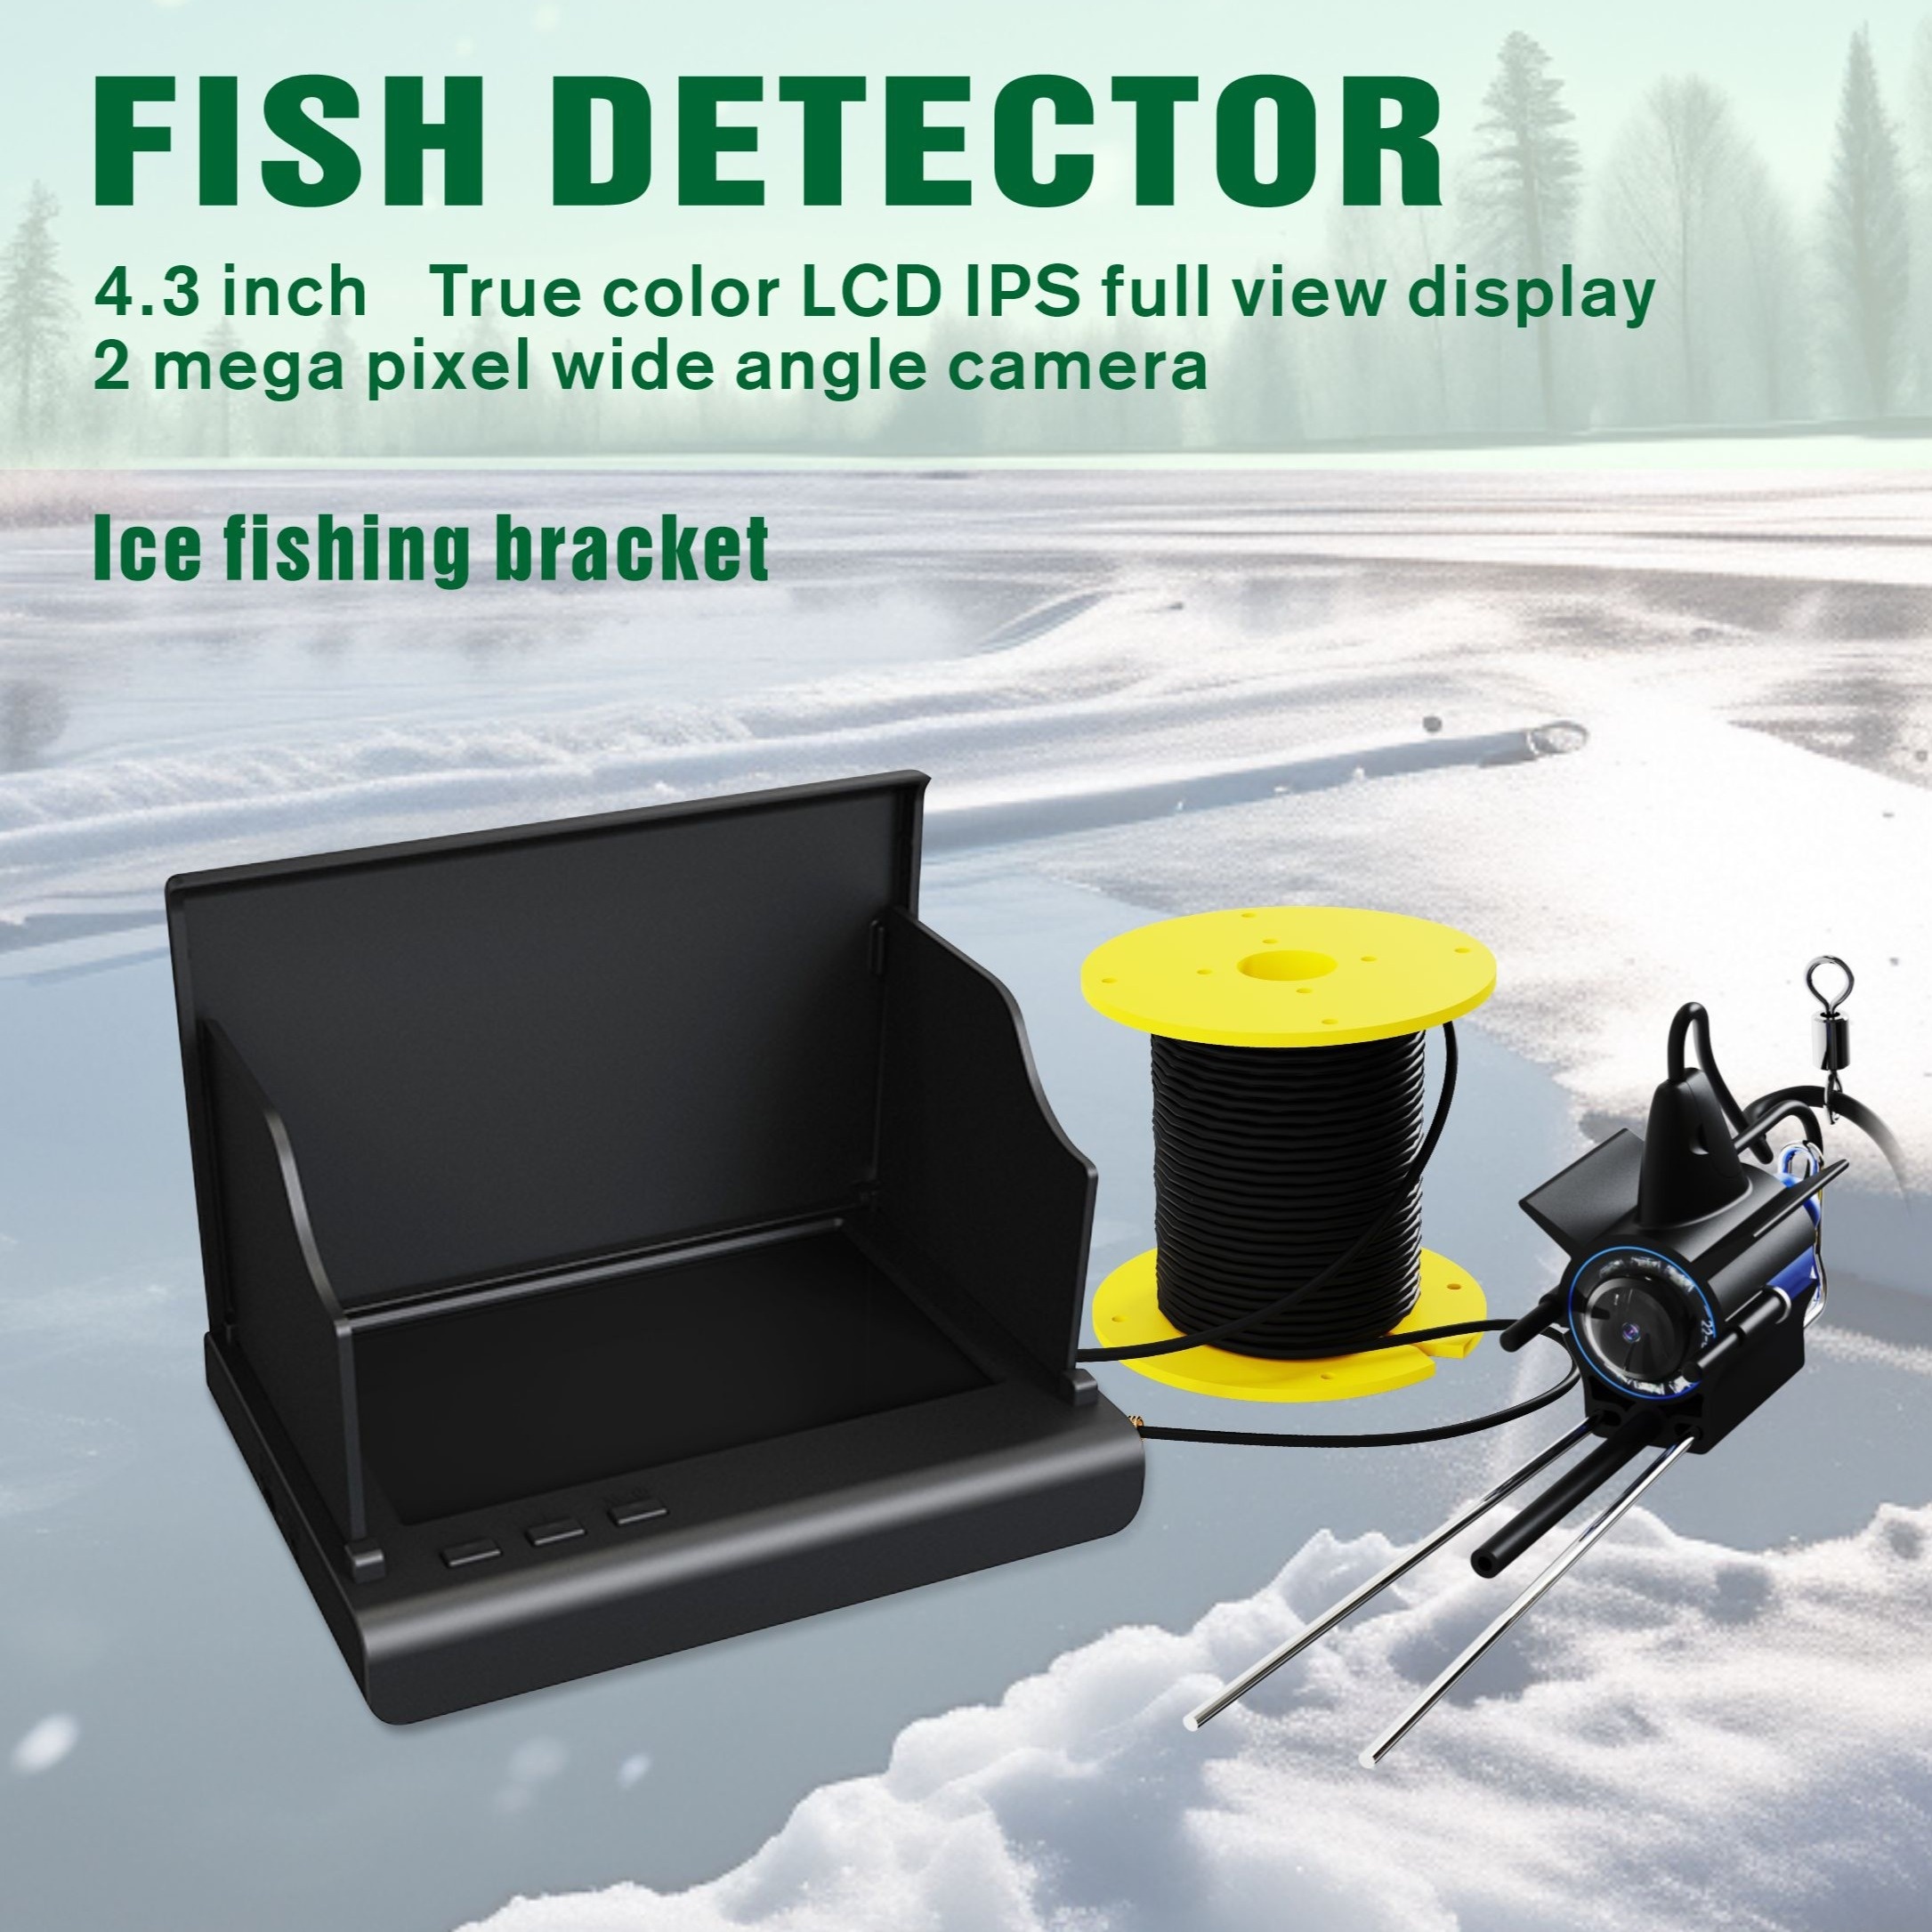 1 Set 1500LUX Underwater Fishing Camera With Infrared LED, 4.3 Inch IPS  Monitor, And 20m/30m Line, Ice Fishing Bracket, 2 Megapixel Wide Angle  Camera